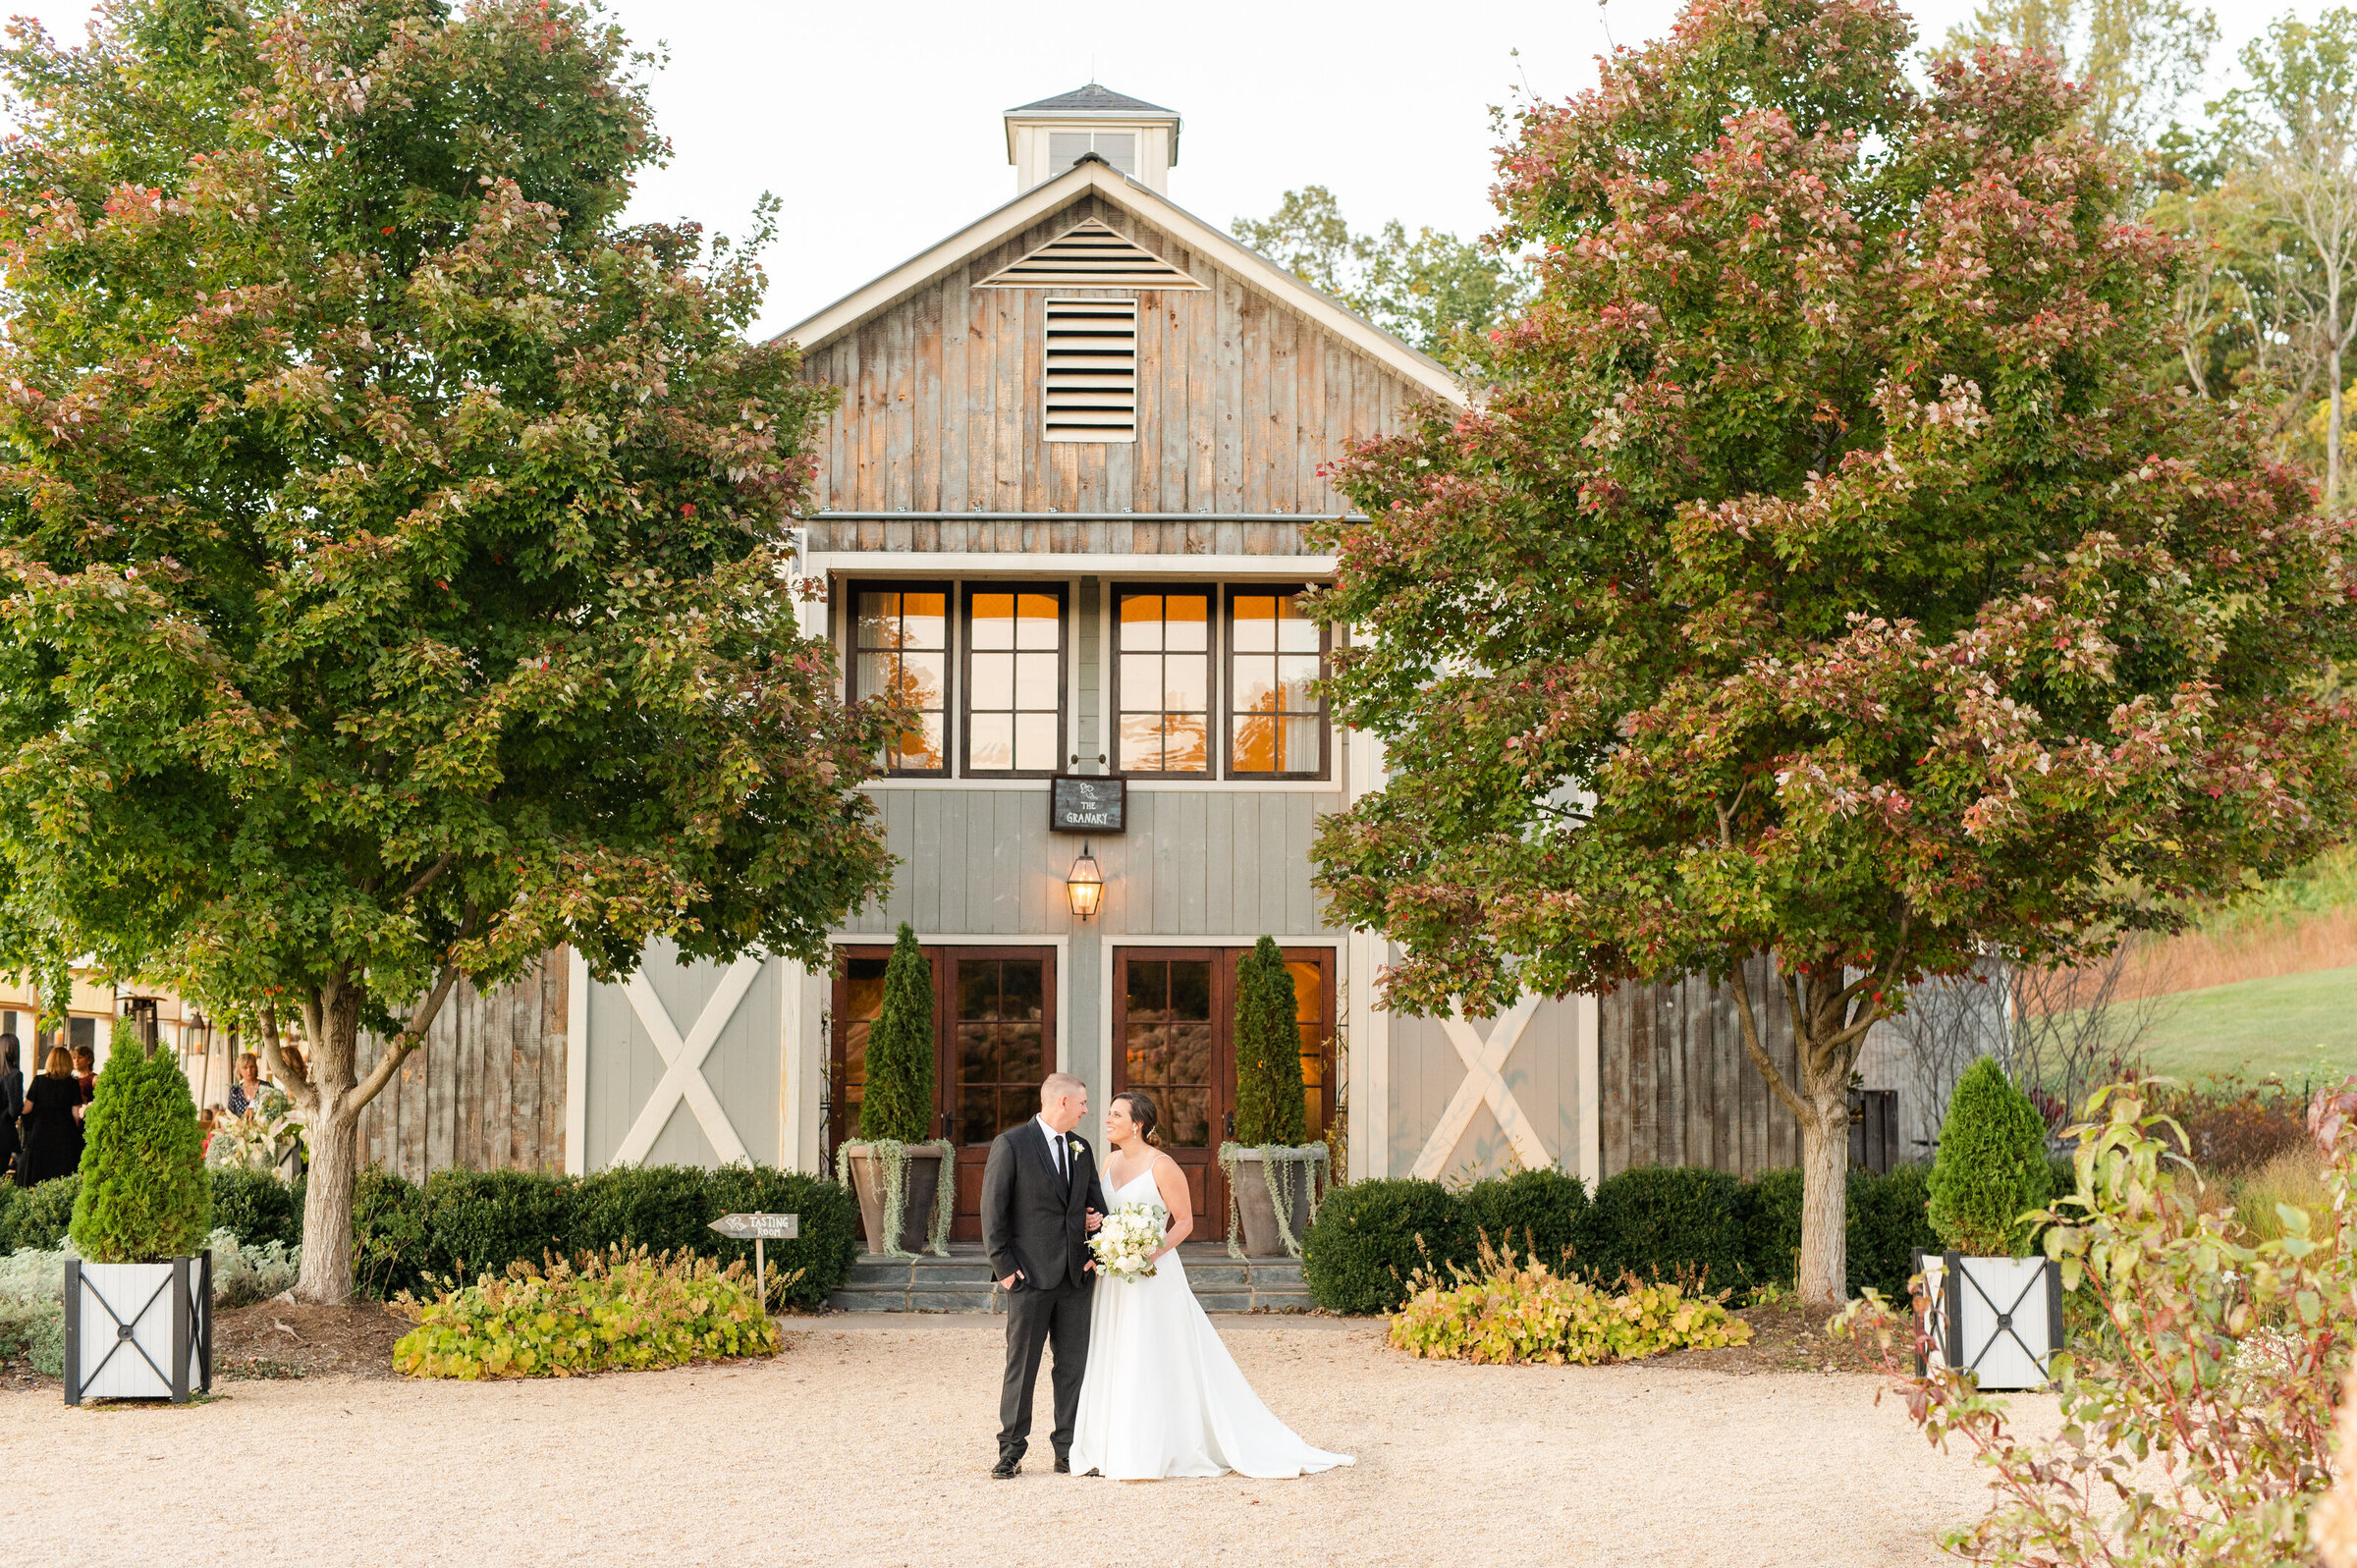 Pippin Hill Farm & Winery Wedding - Laura & Connor Favorites 0137